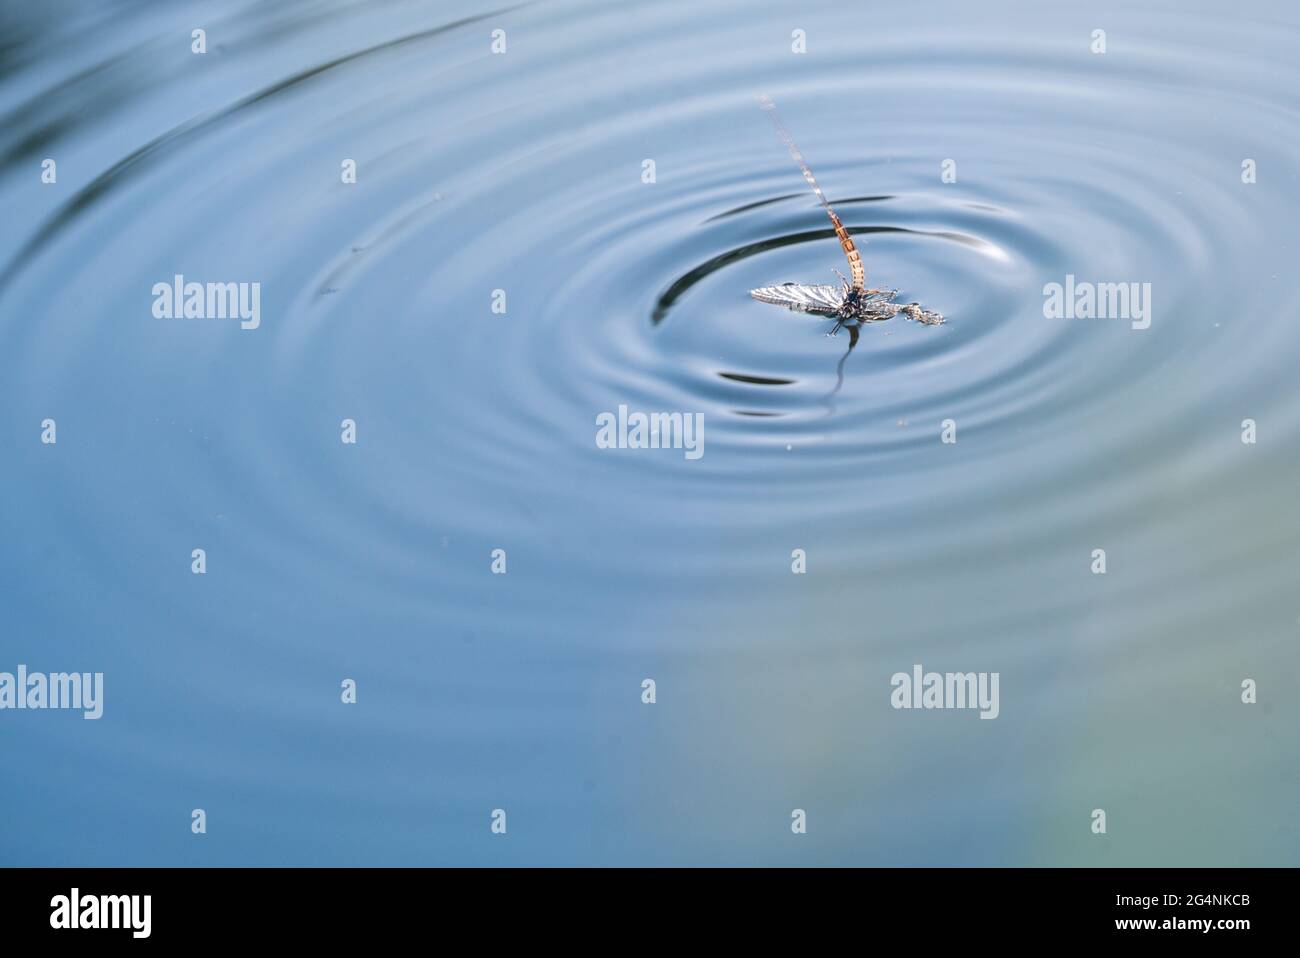 Mayfly in Water Stock Photo